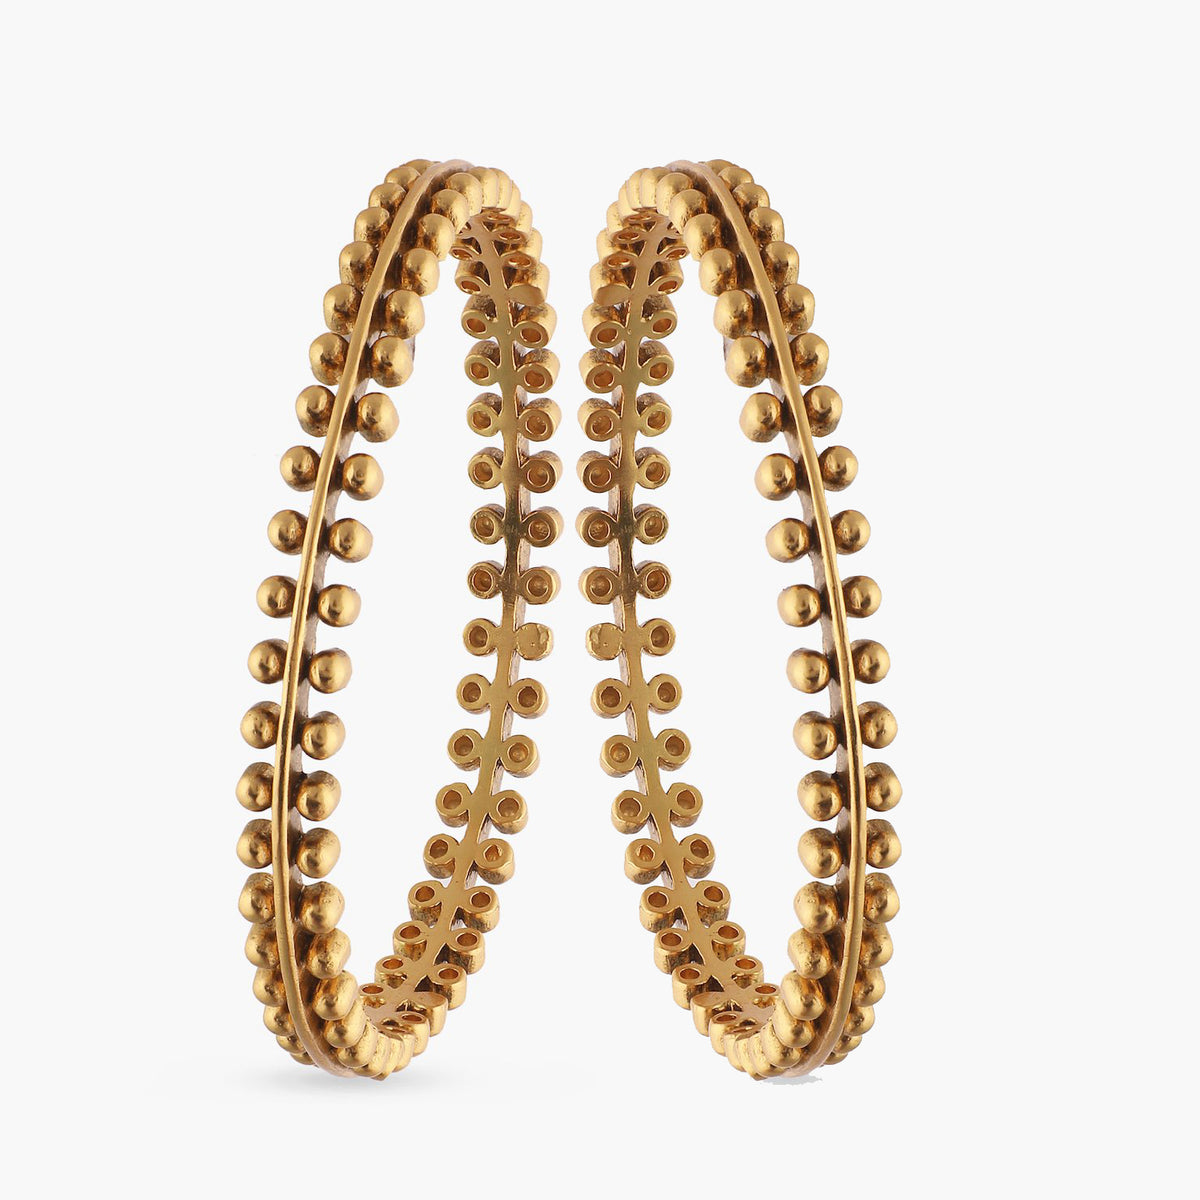 Althaia Antique Gold-Plated Tribal Bangles